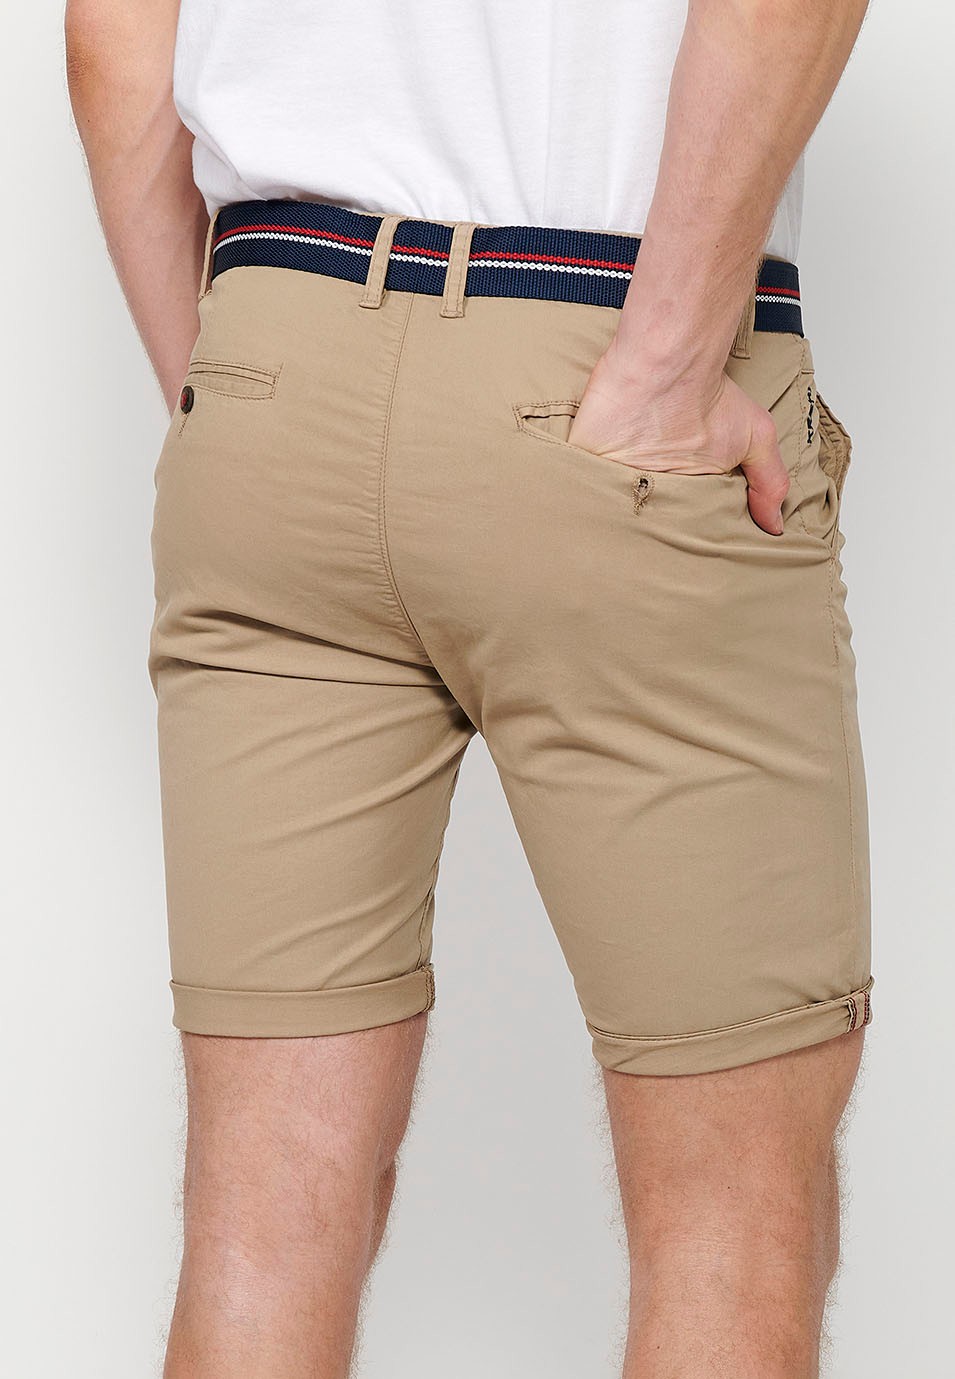 Shorts with a turn-up finish with front closure with zipper and button and belt in Beige Color for Men 7